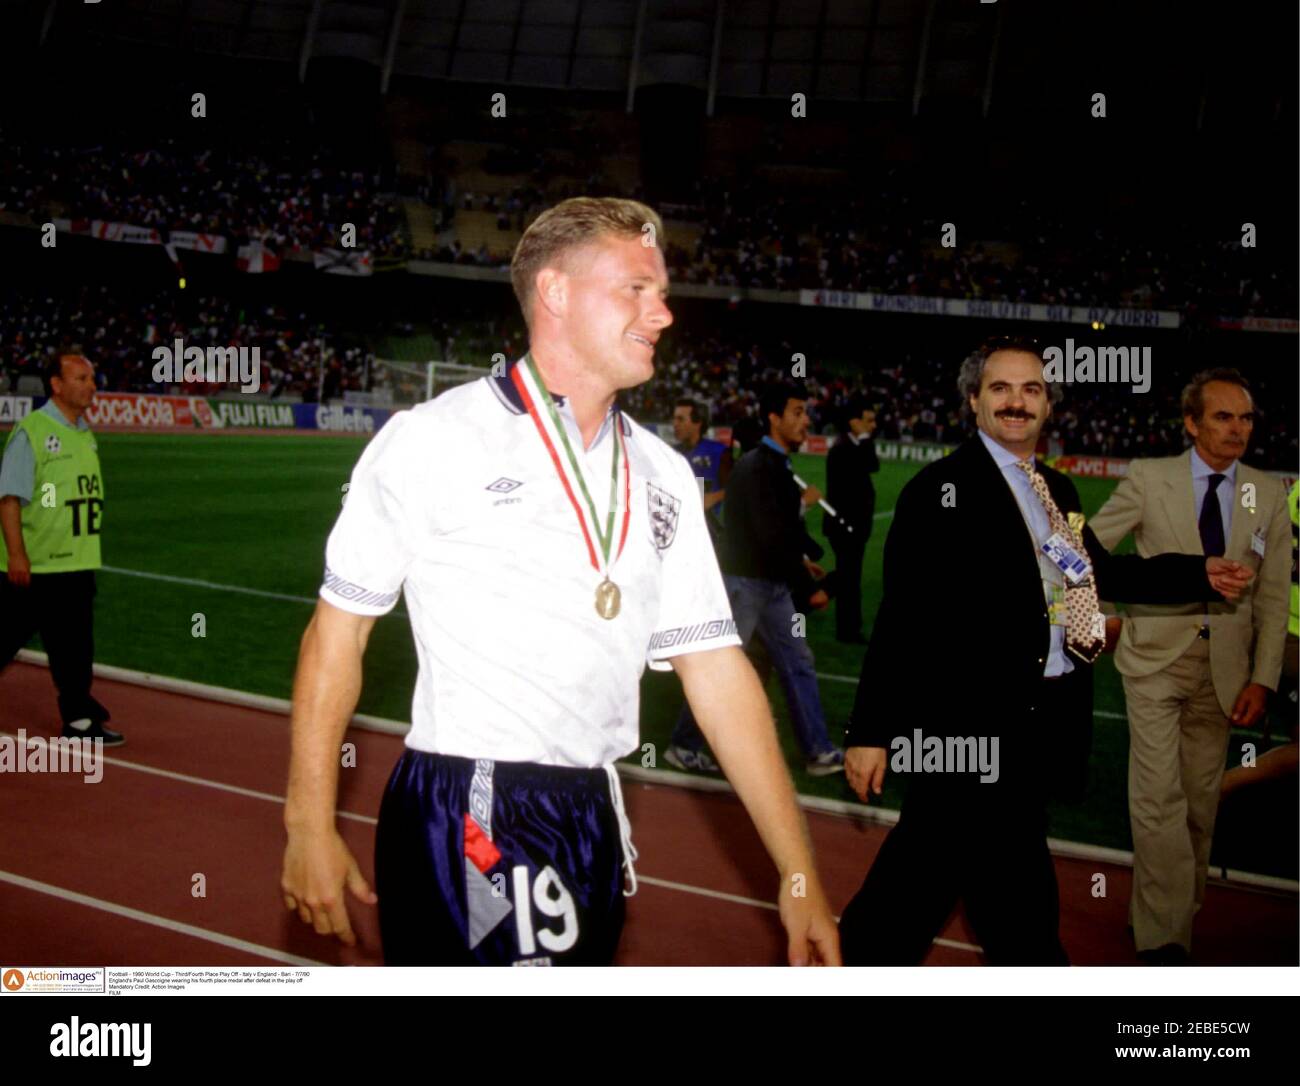 Football 1990 Fifa World Cup Third Fourth Place Play Off Italy V England Stadio Sant Nicola Bari 7 7 90 England S Paul Gascoigne Wearing His Fourth Place Medal